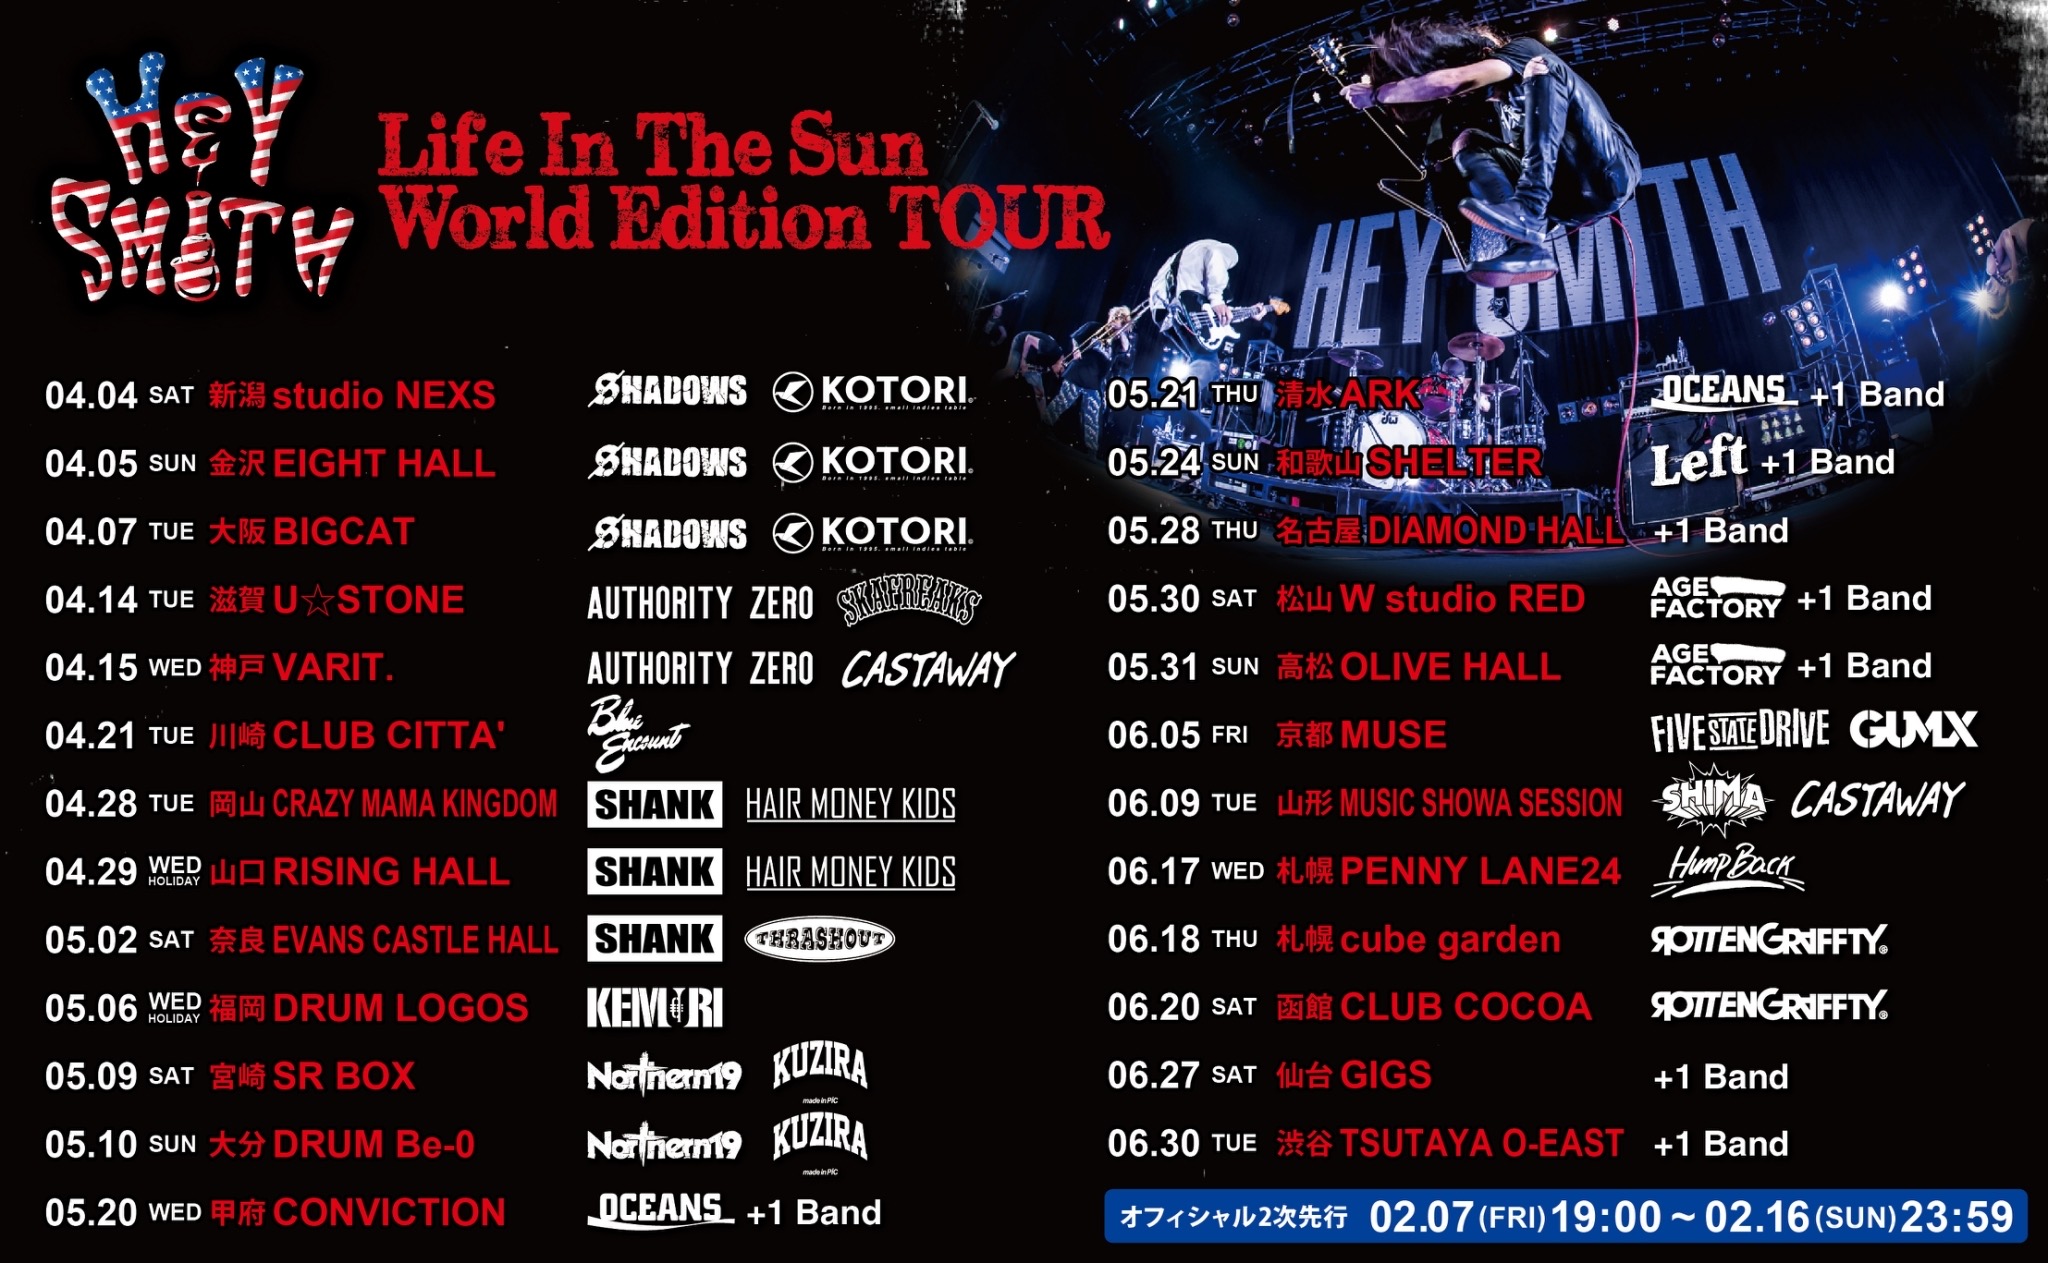 HEY SMITH 'Life In The Sun World Edition TOUR'